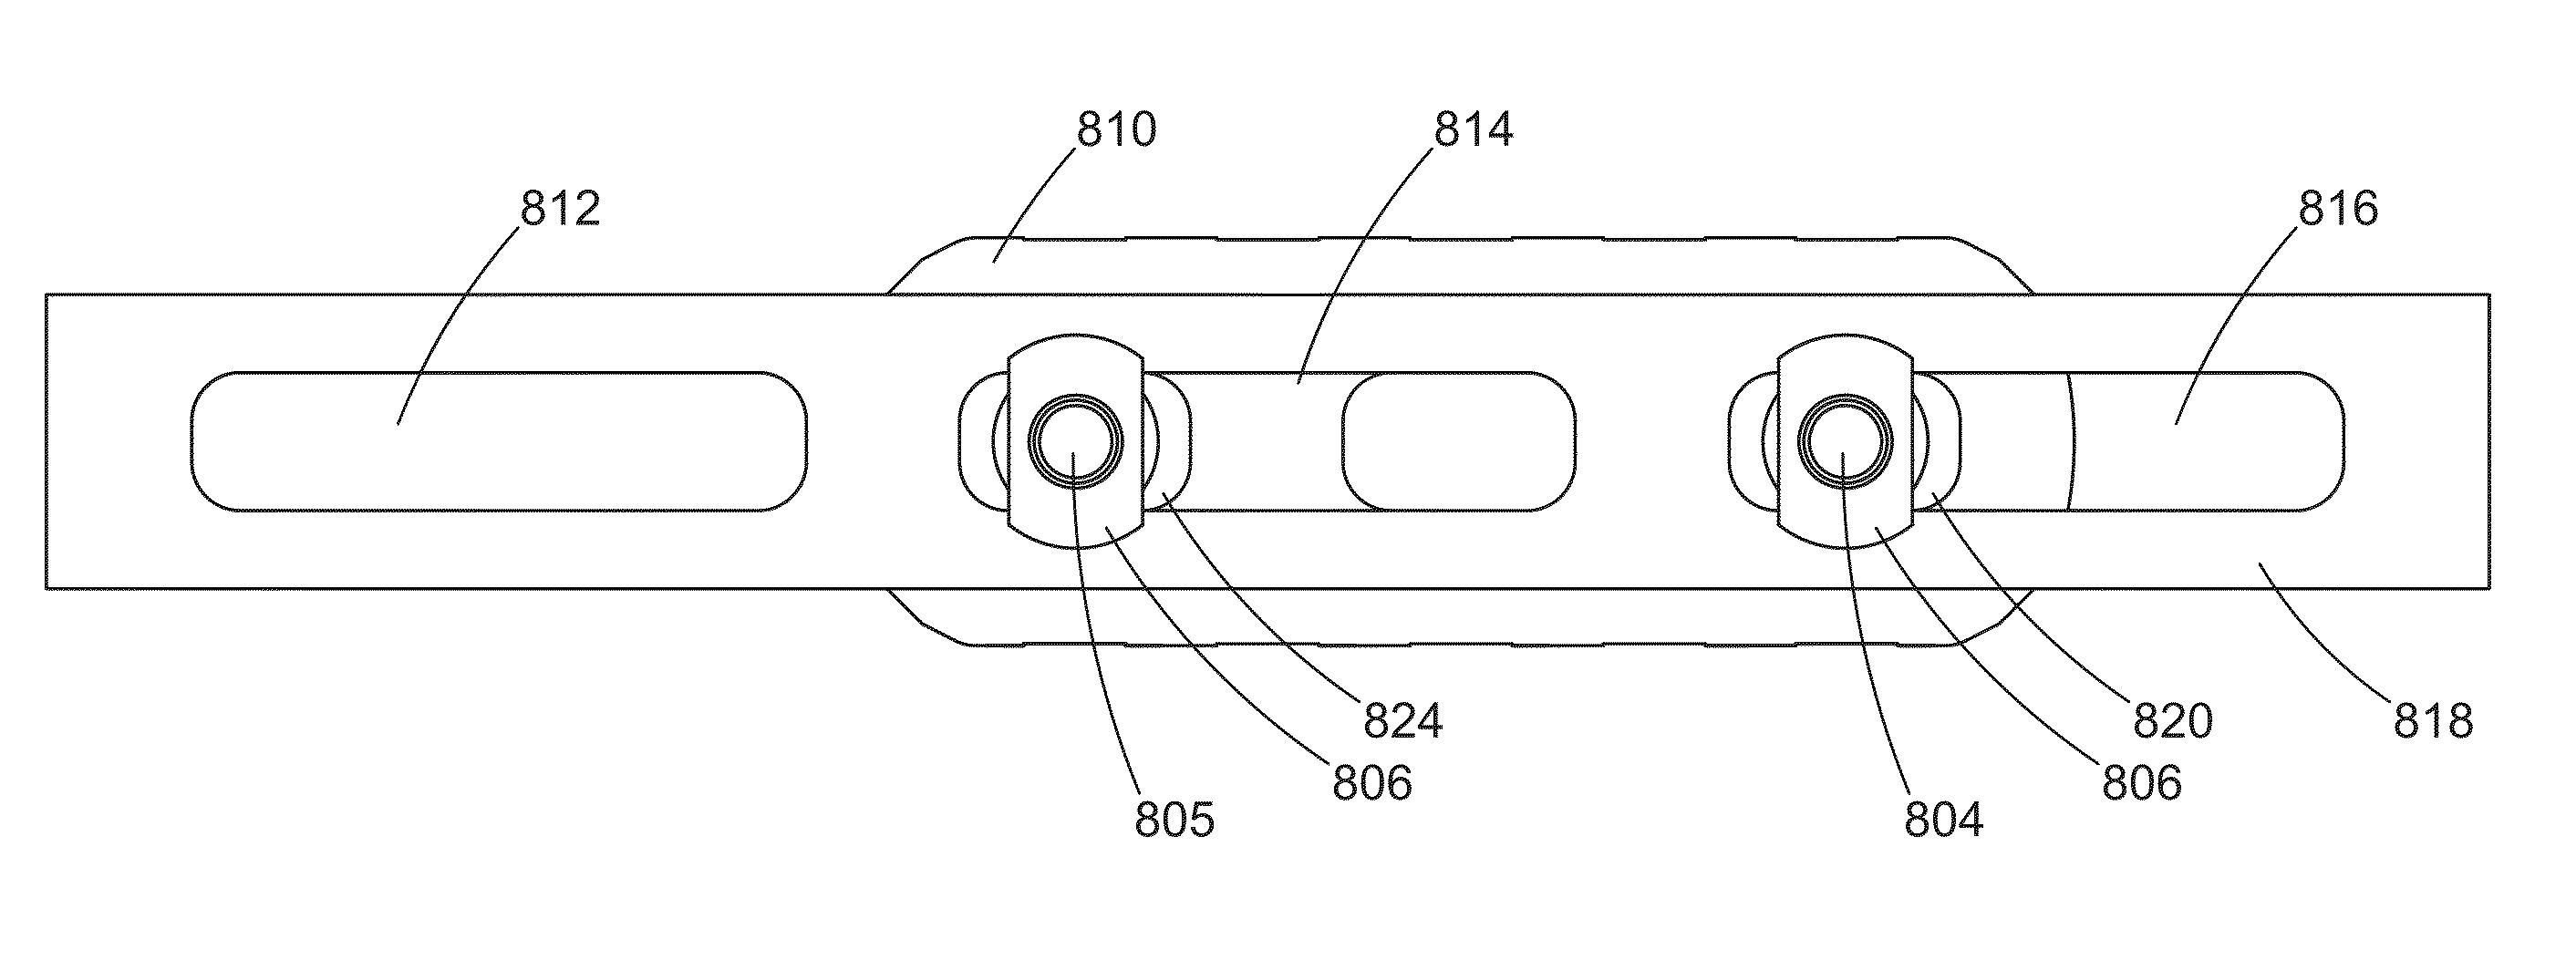 Firearm accessory mounting interface